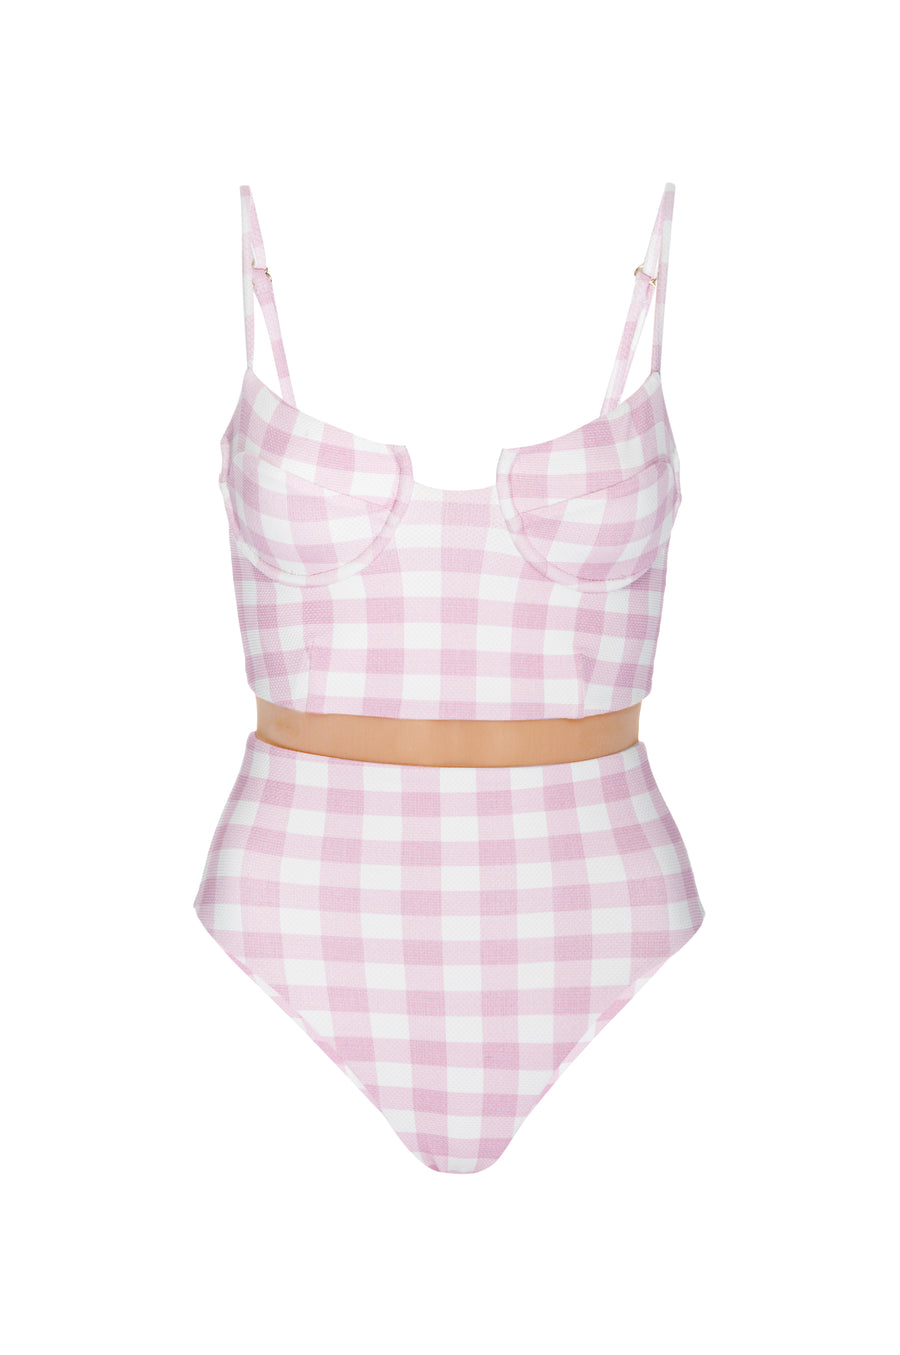 The Kaity - Pink Gingham